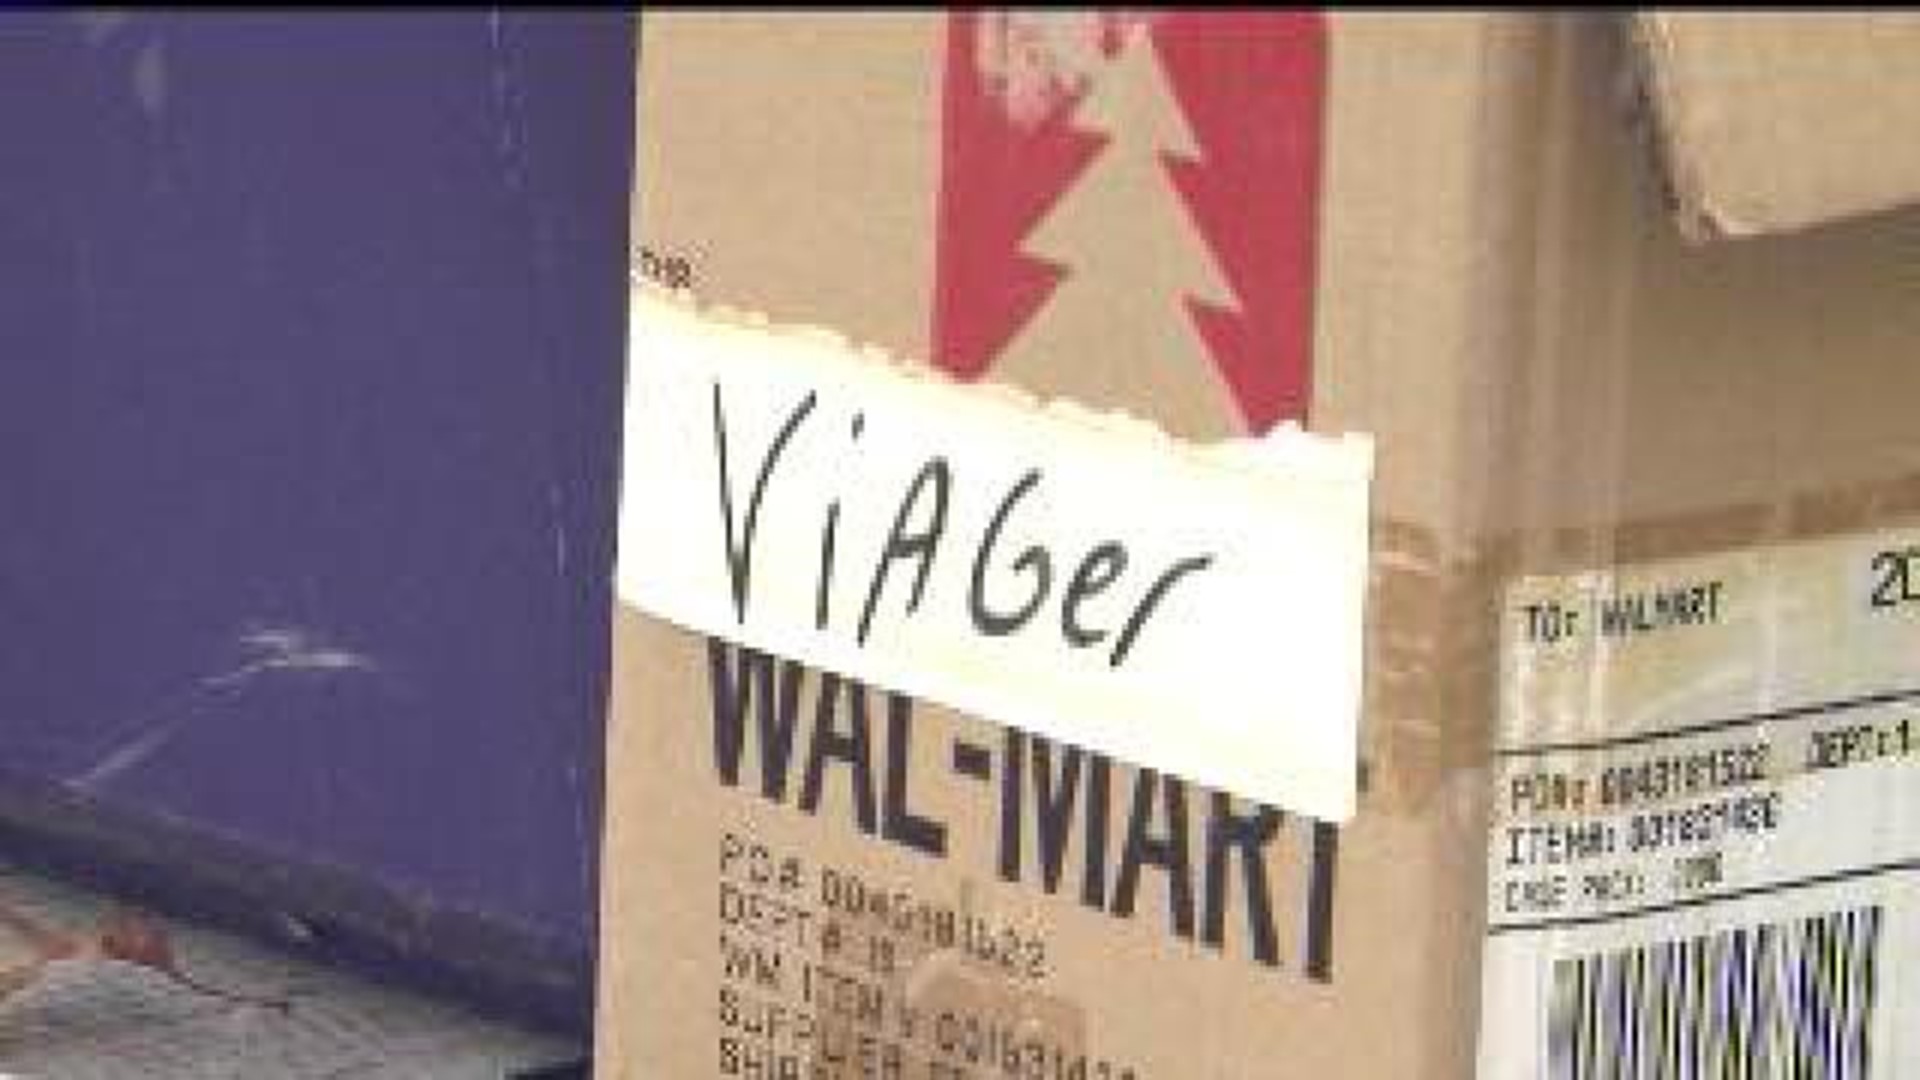 Streetside Sale Helps Viager Family